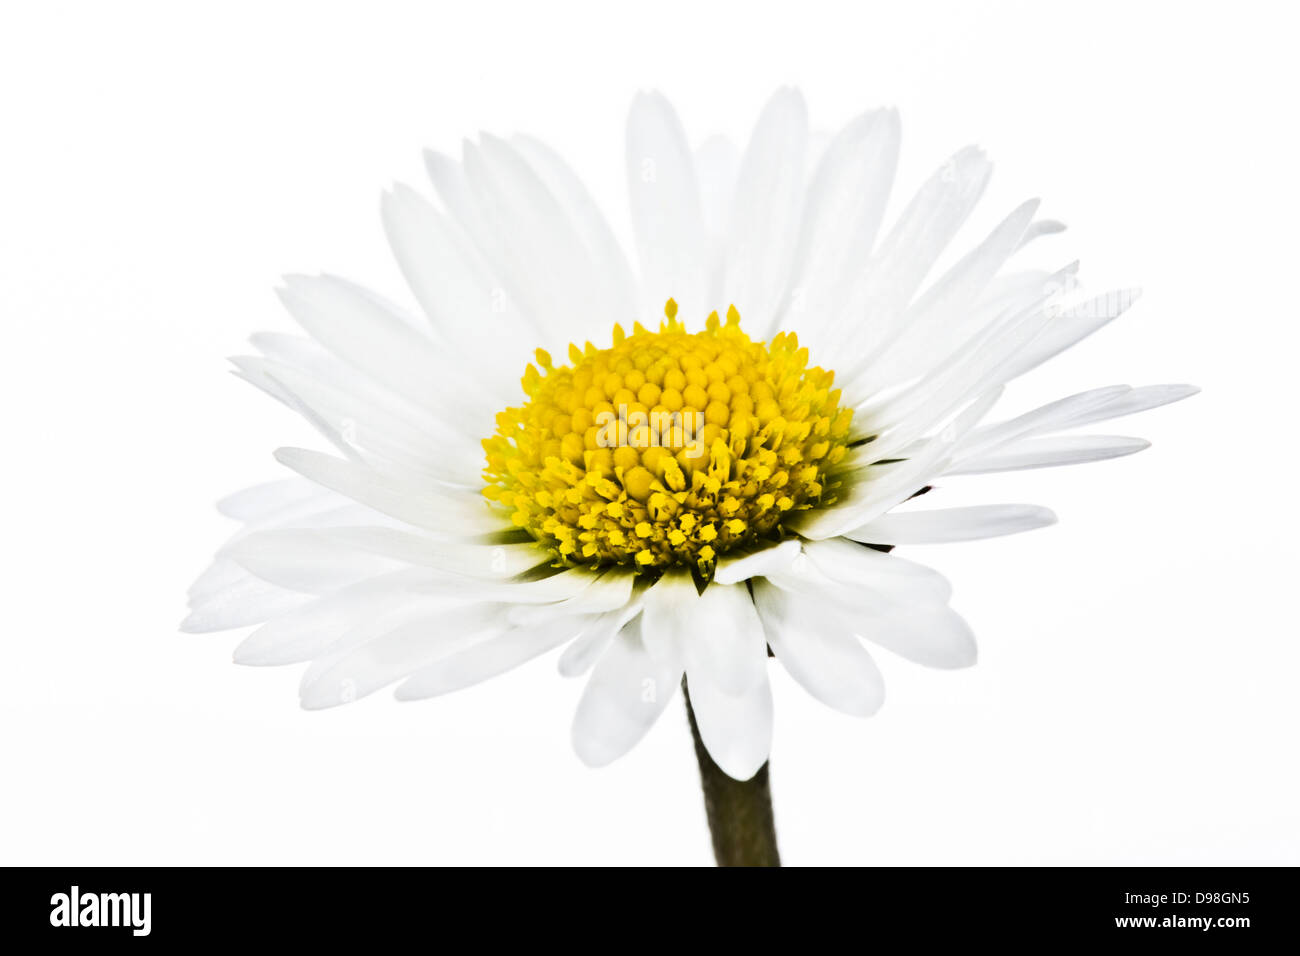 Daisy flower against white background, close up Stock Photo